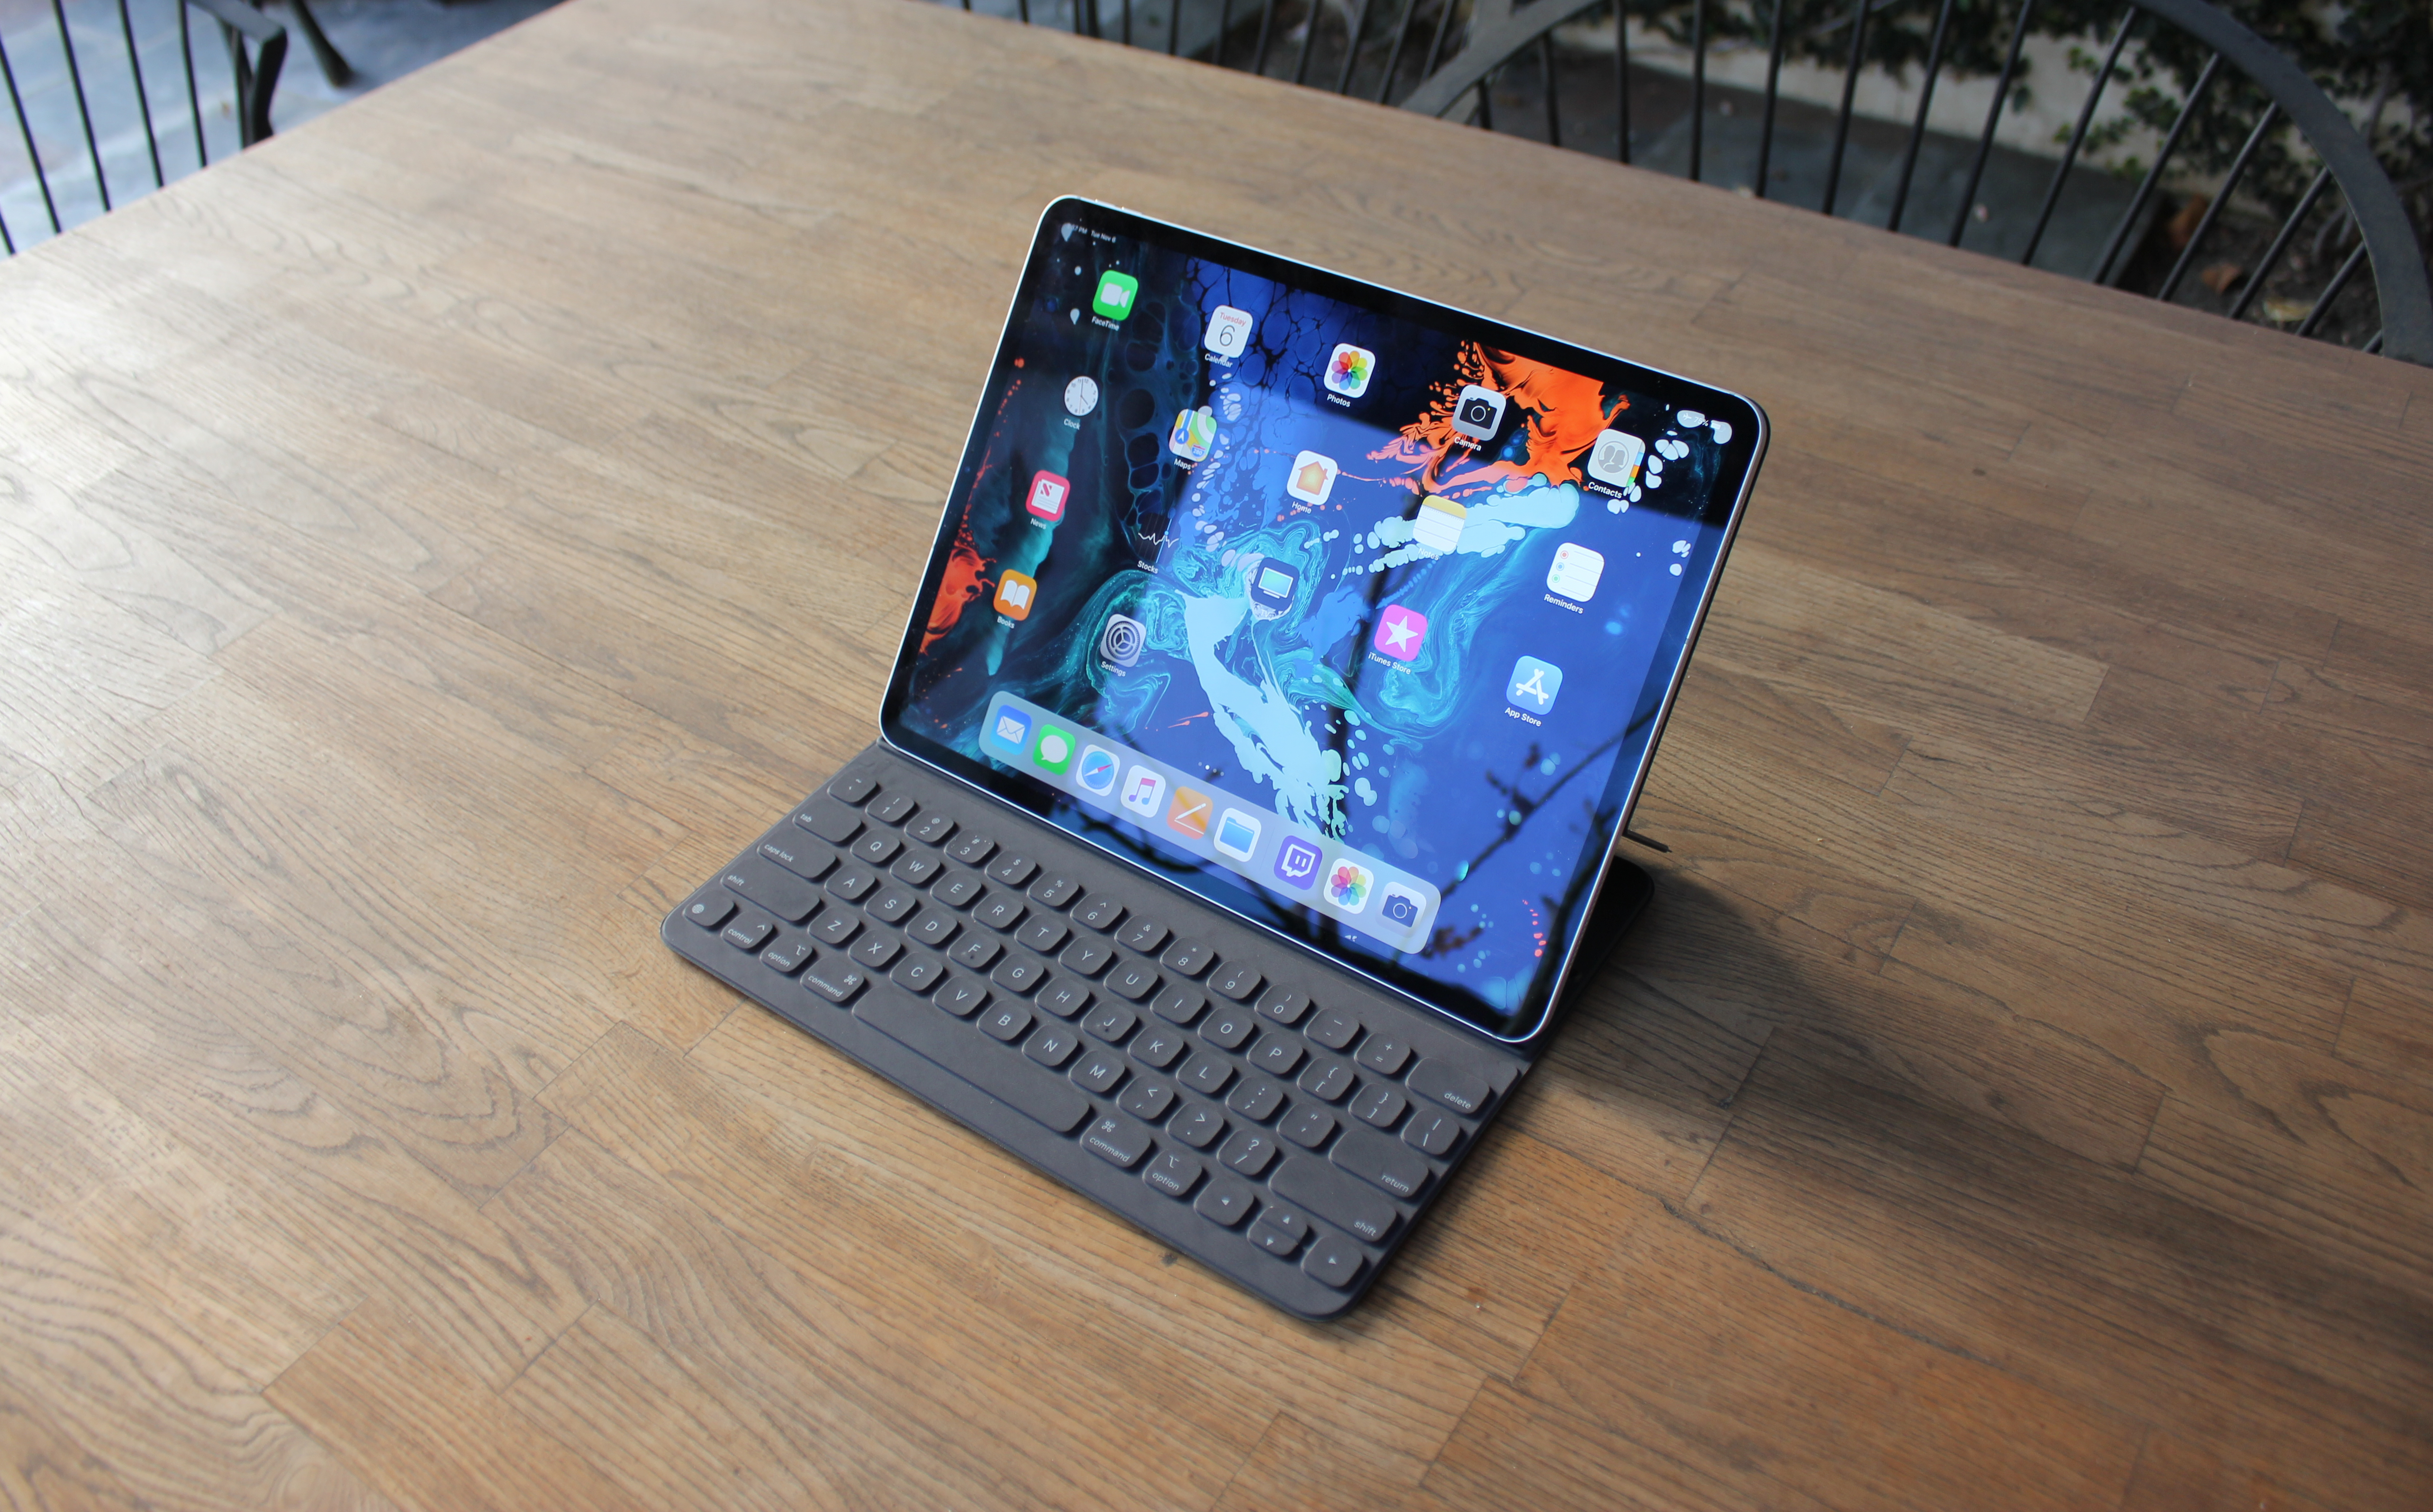 2018 iPad Pro review: “What's a computer?” | Ars Technica